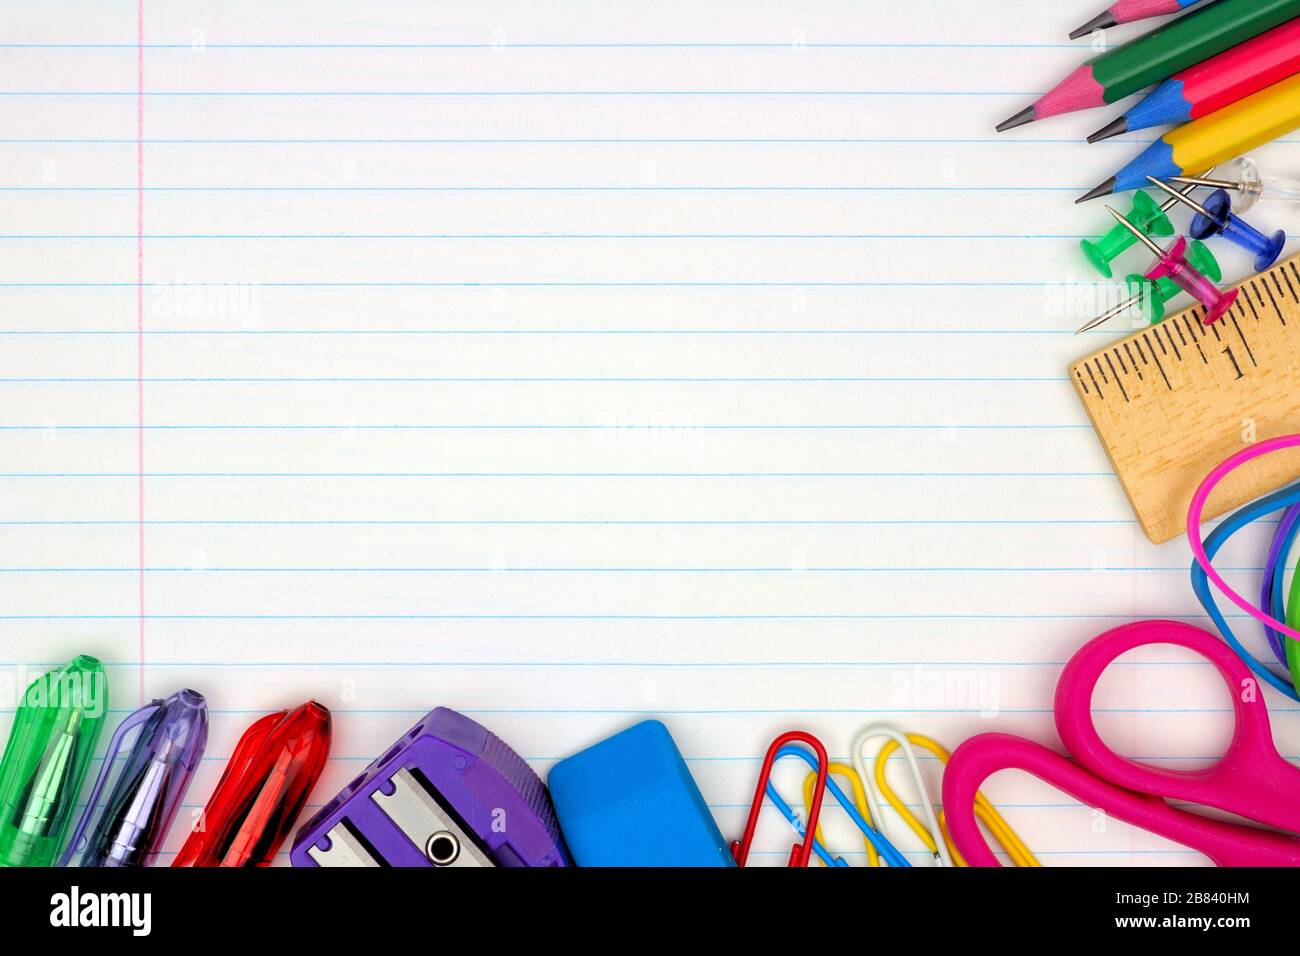 Colorful school supplies corner border over a lined paper background Stock Photo